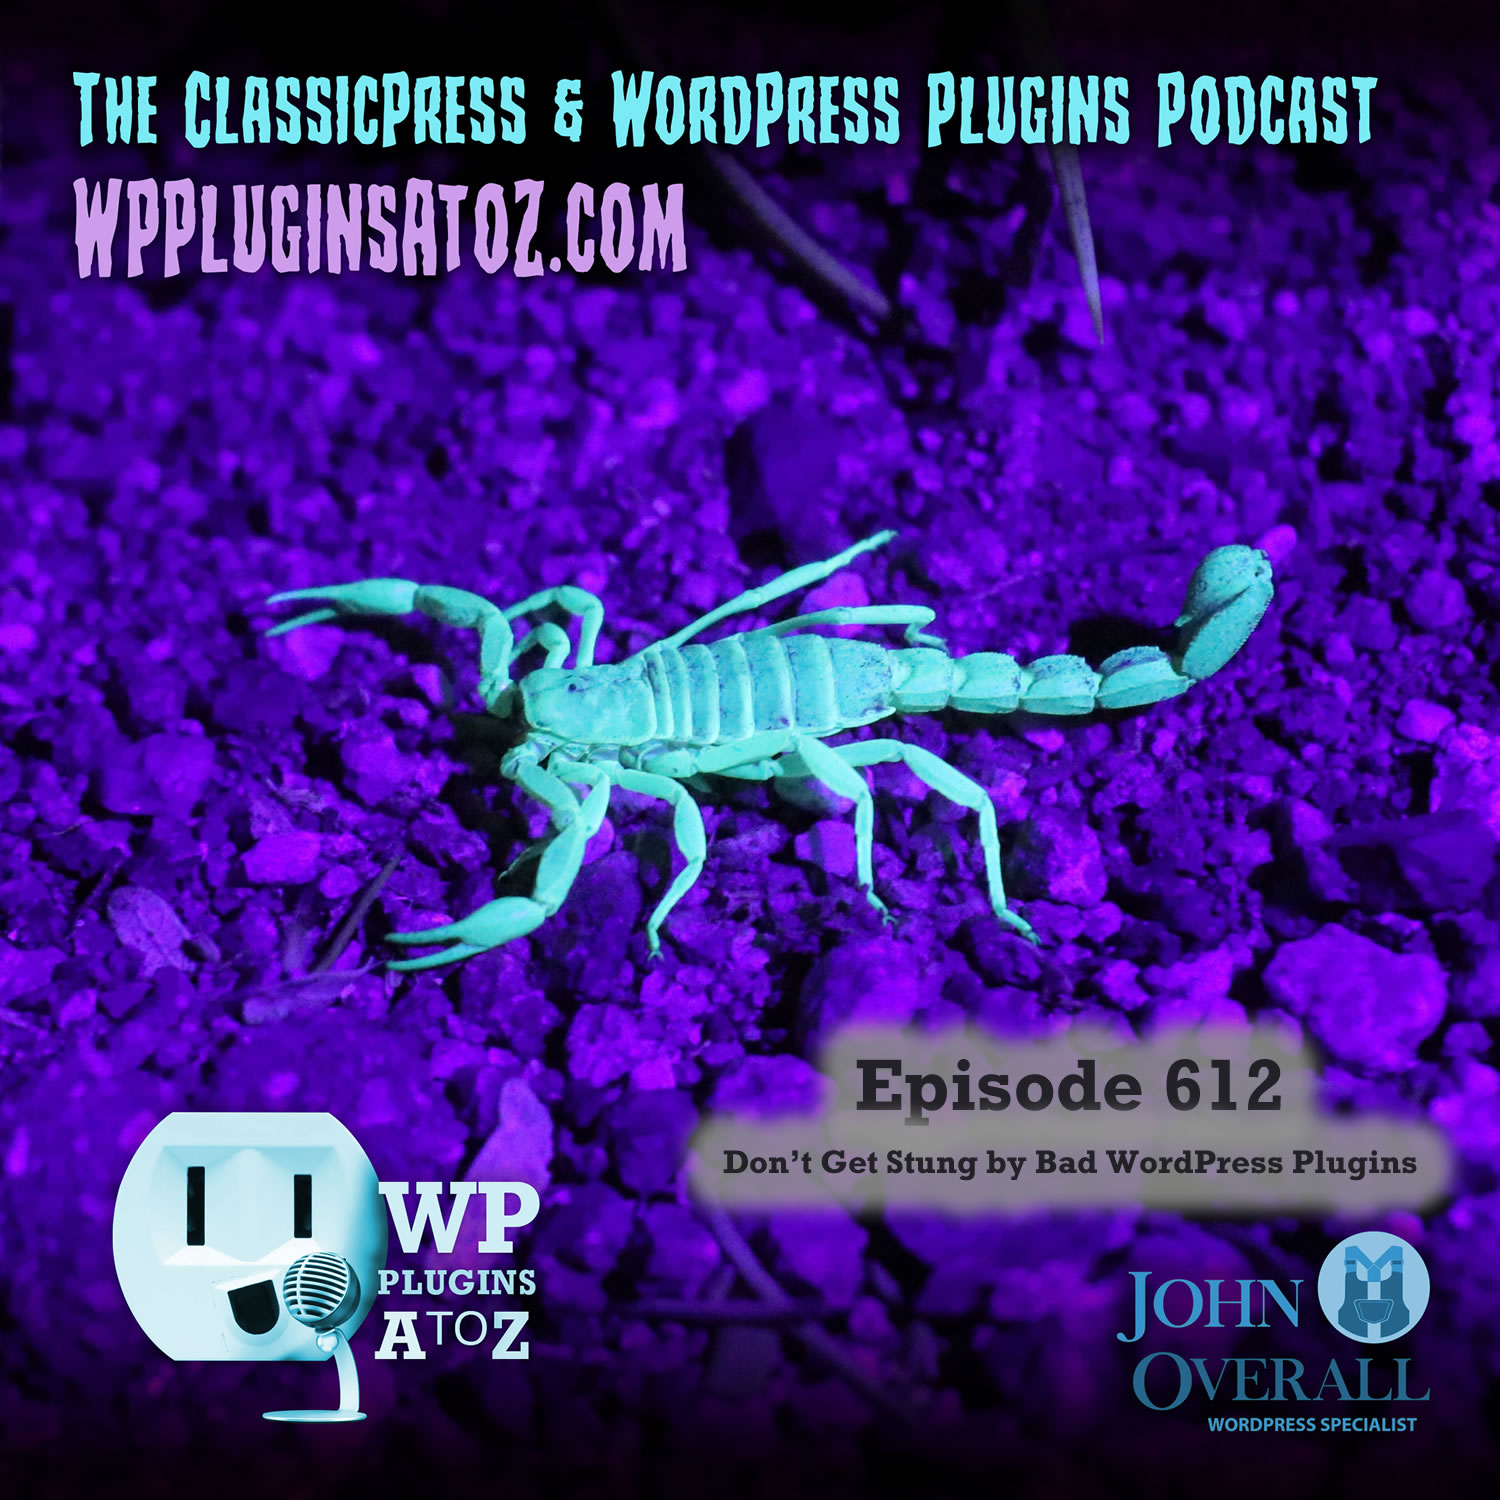 It's Episode 612 and we have plugins for Bottoming Out & Geolocation... and WordPress News. It's all coming up on WordPress Plugins A-Z!